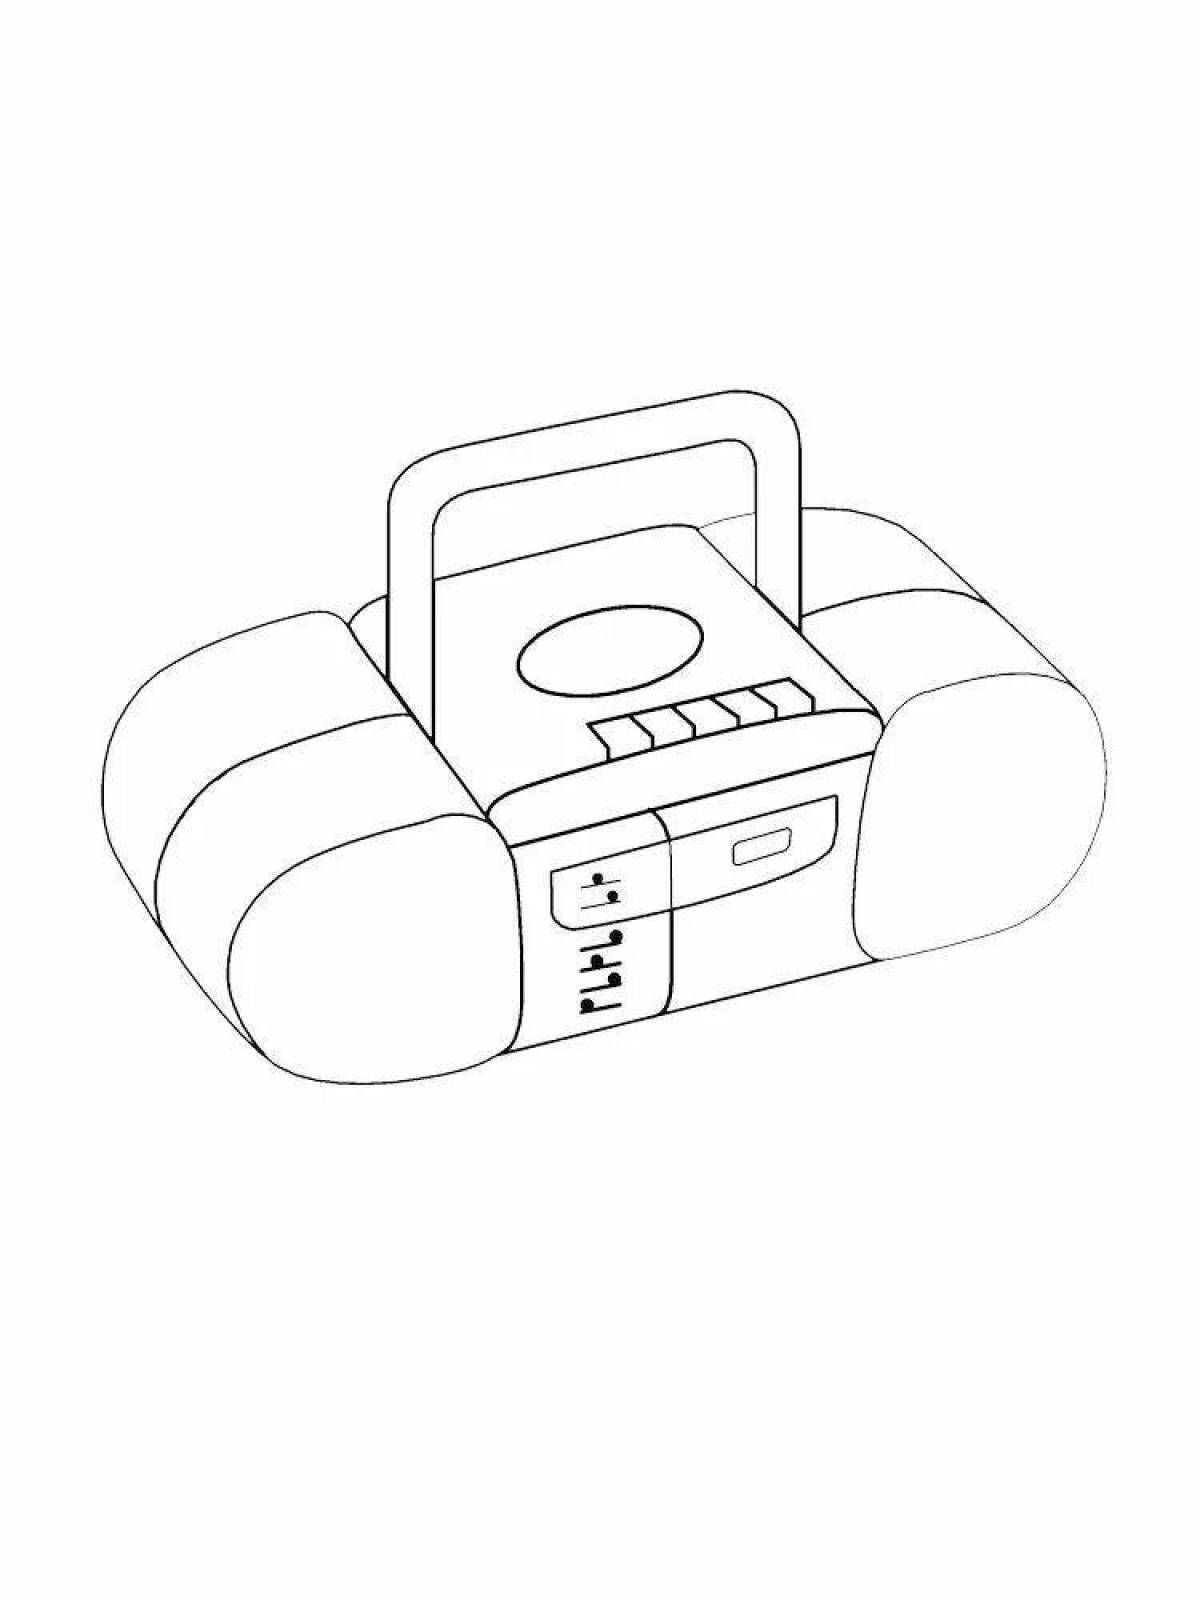 Creative household appliances coloring pages for 6-7 year olds